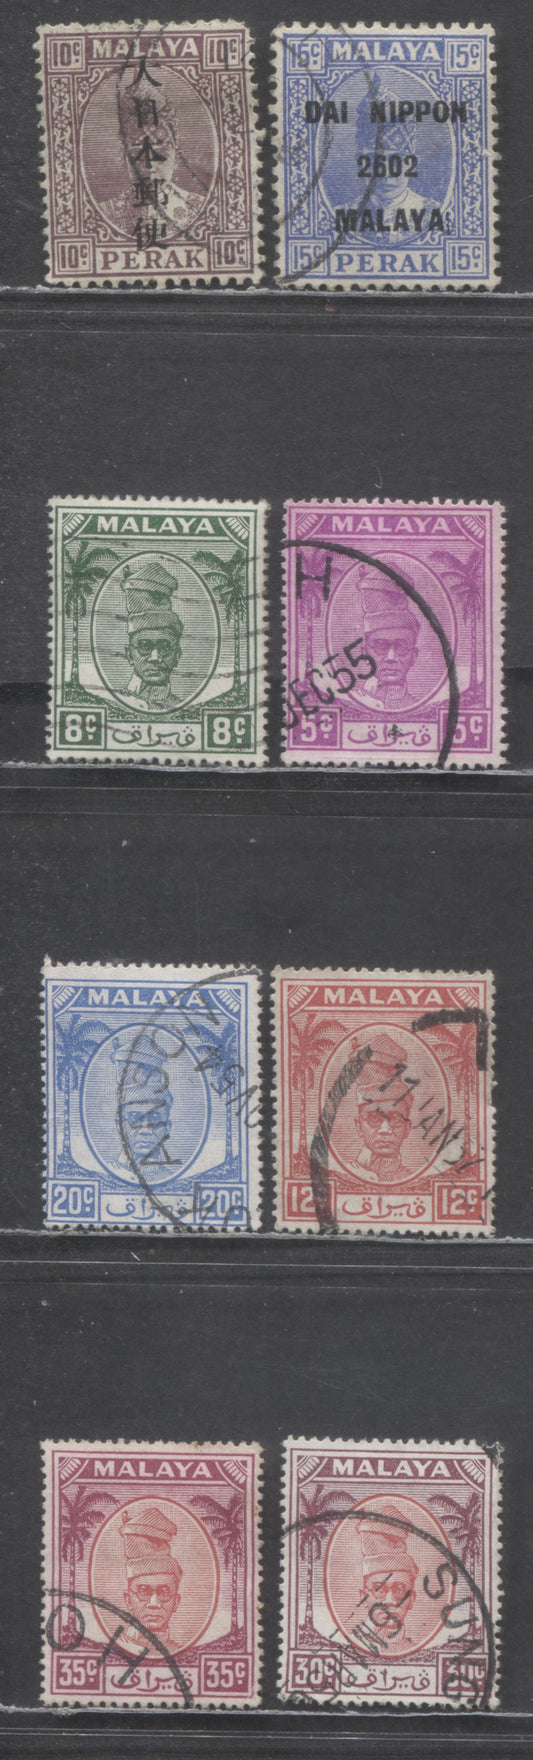 Lot 67 Malaya - Perak SC#120/N37 1942 Japanese Occupation Overprints & Sultan Yussuf Izuddin Shah, 8 Fine/Very Fine Used Singles, Click on Listing to See ALL Pictures, 2017 Scott Cat. $16.75